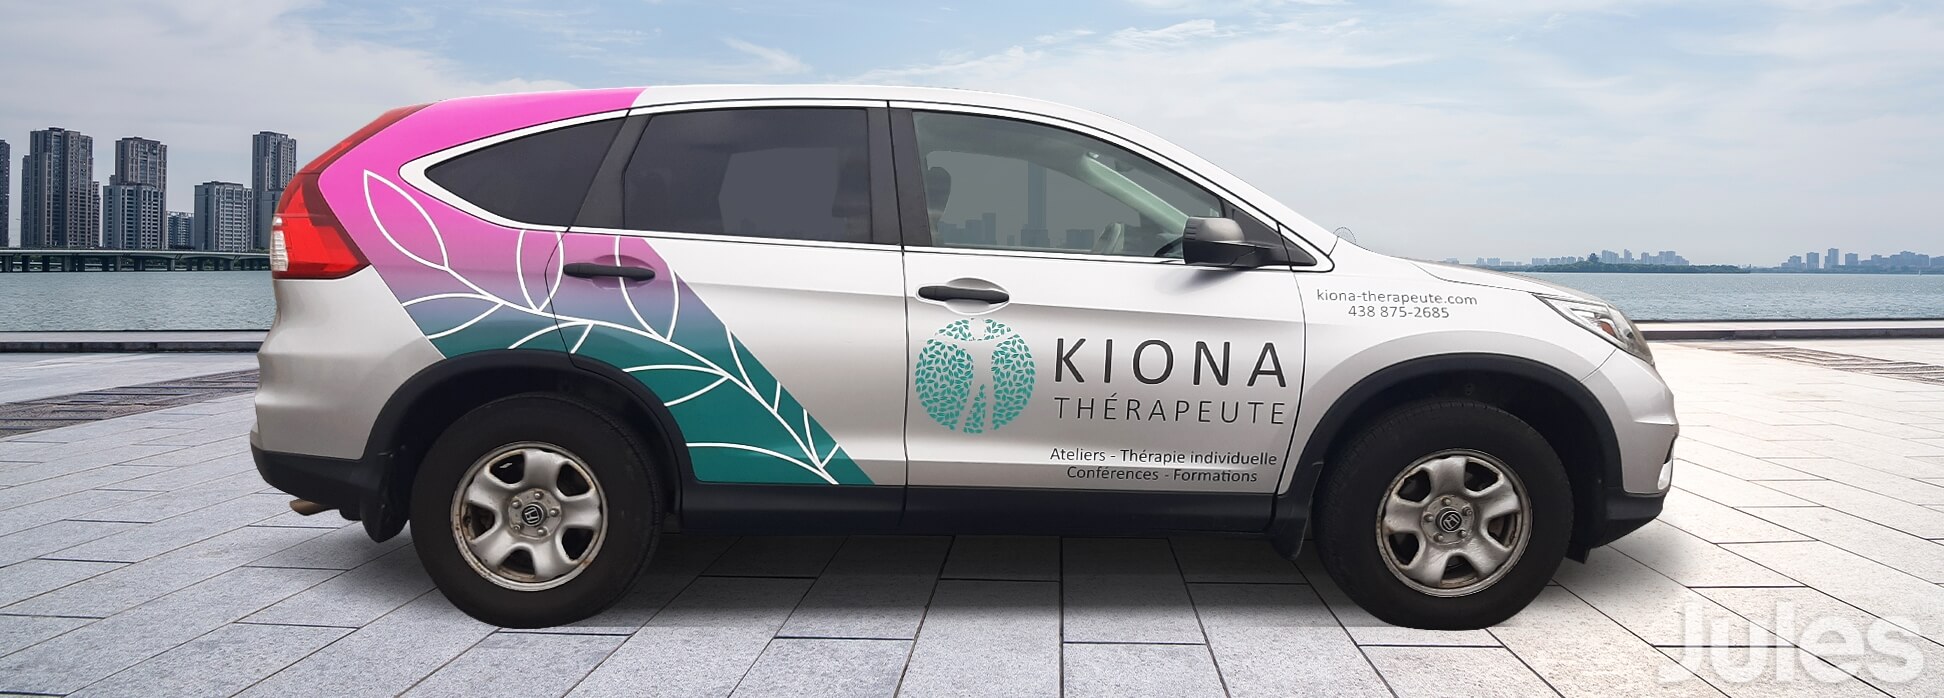 KIONA THERAPEUTE LETTRAGE HONDA CR-V WRAP ATELIERS THERAPIE INDIVIDUELLE CONFERENCES FORMATIONS